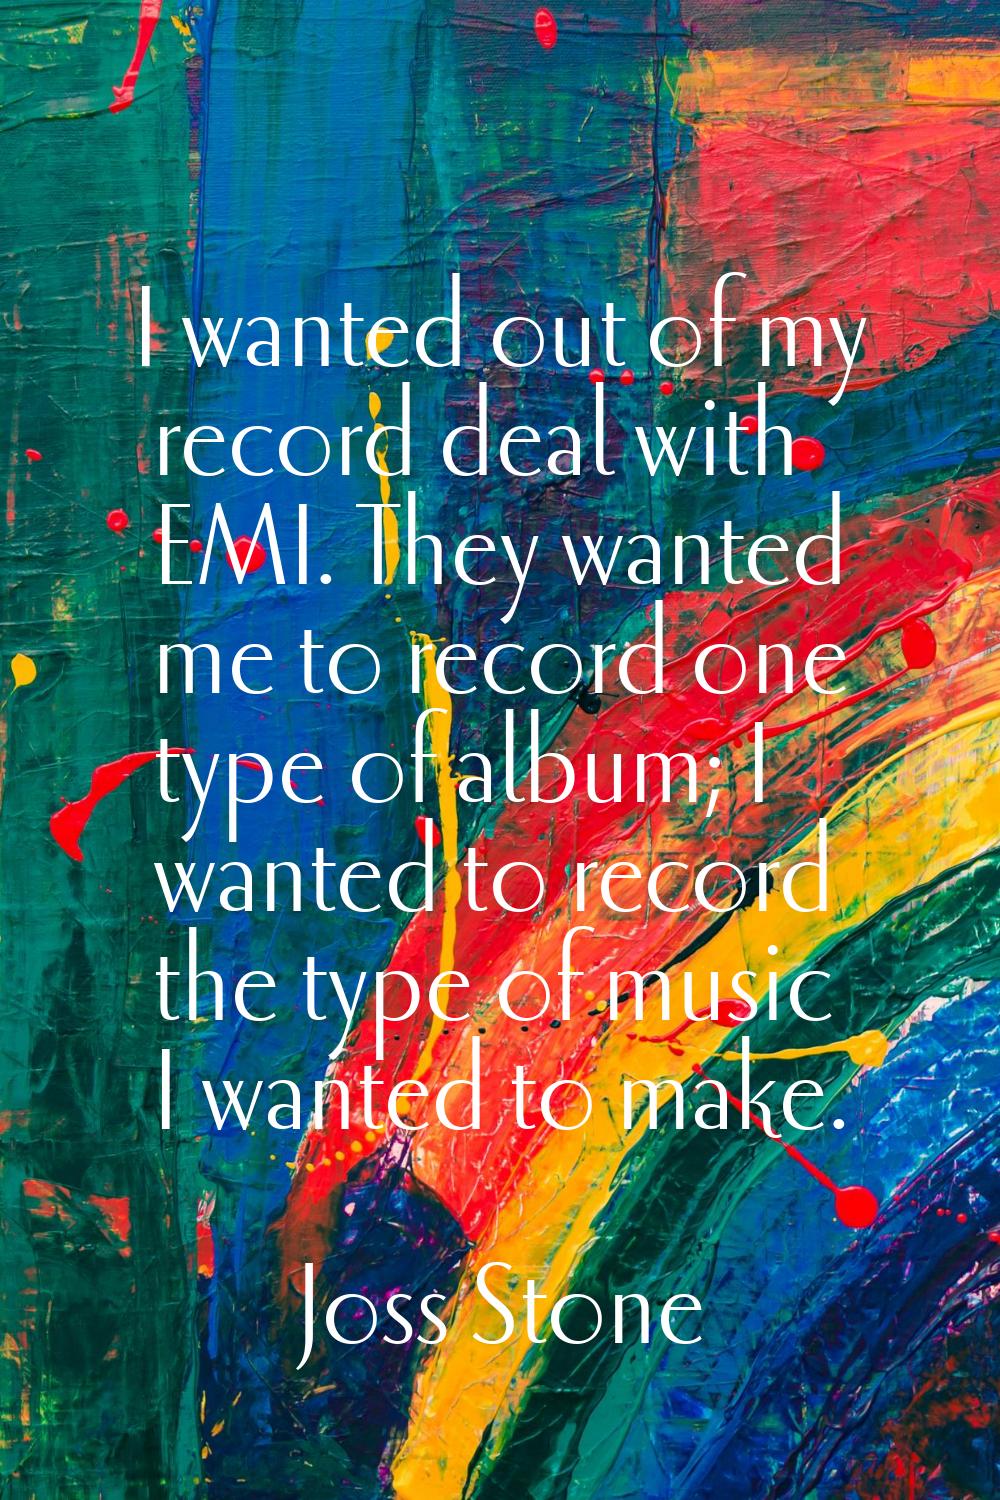 I wanted out of my record deal with EMI. They wanted me to record one type of album; I wanted to re